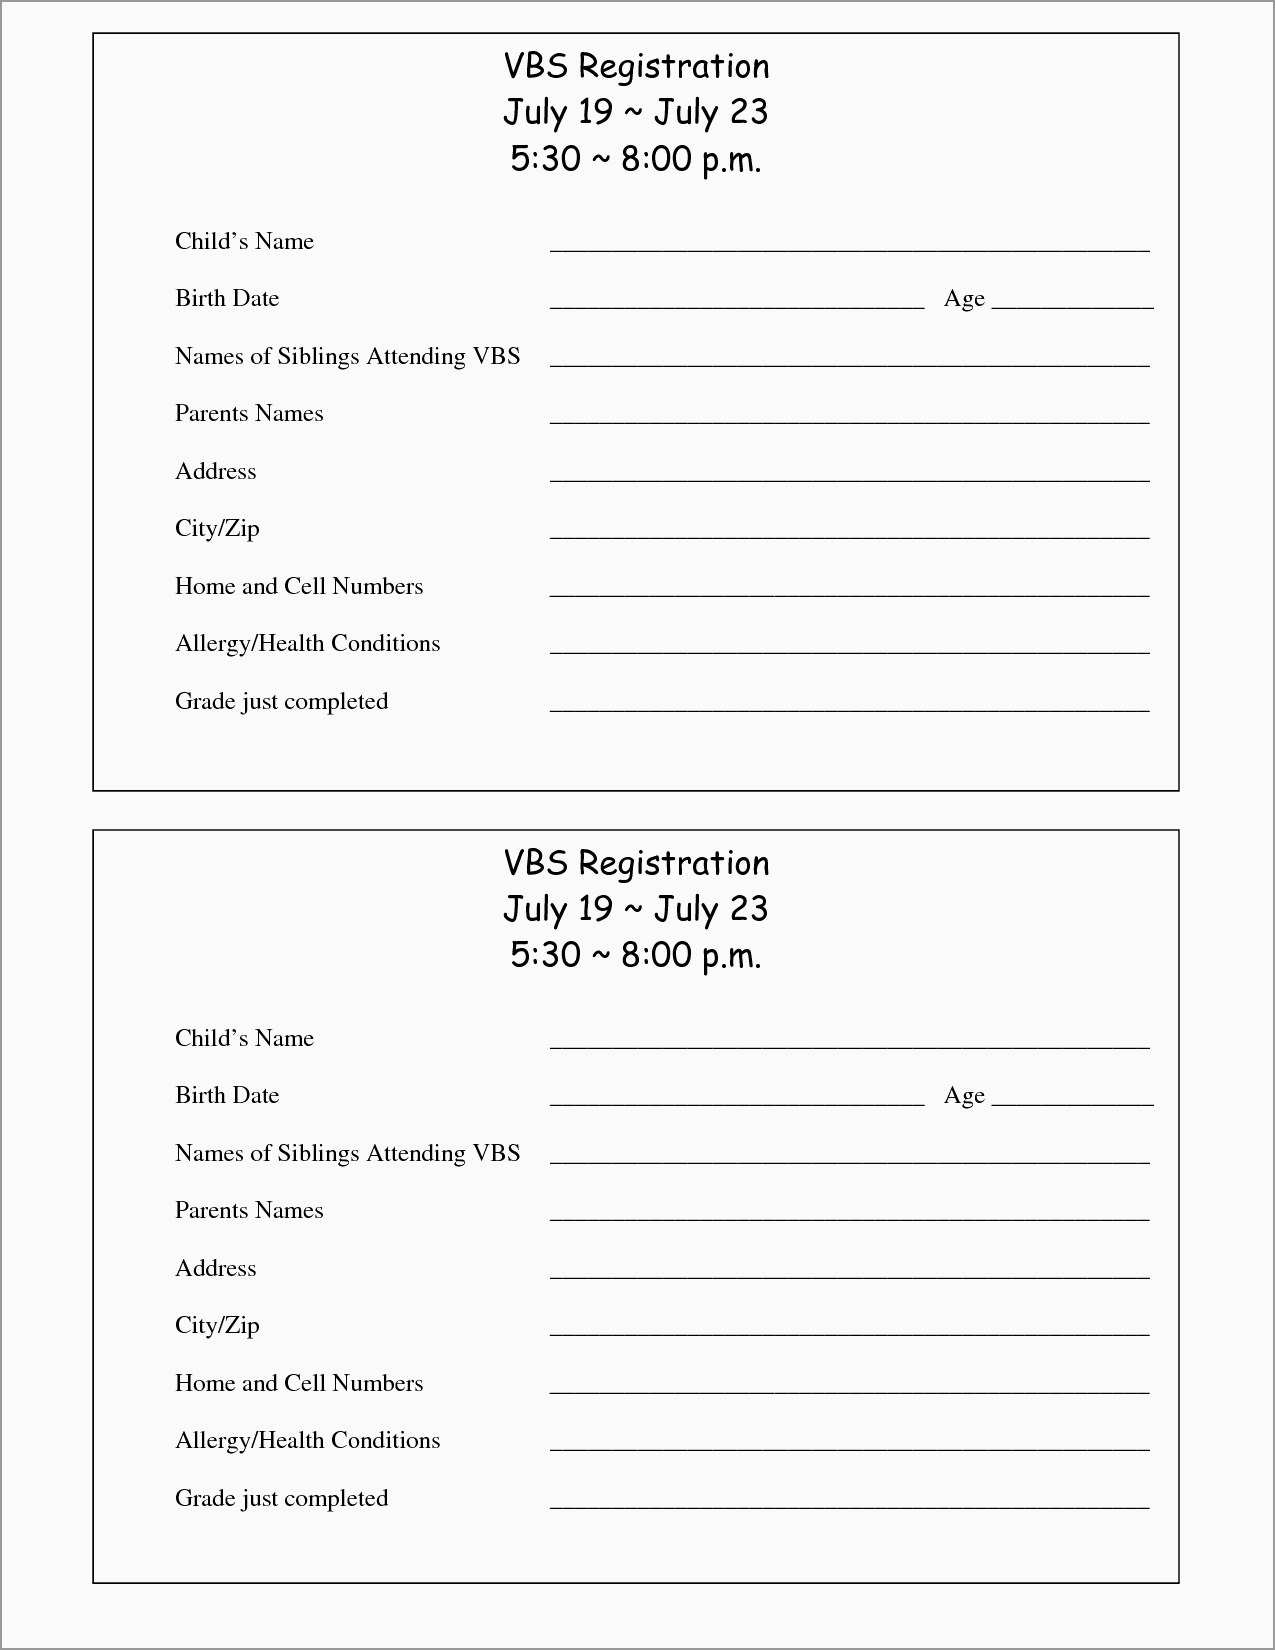 Registration Form Template Word Free Download New Printable Vbs - Free Printable Membership Forms